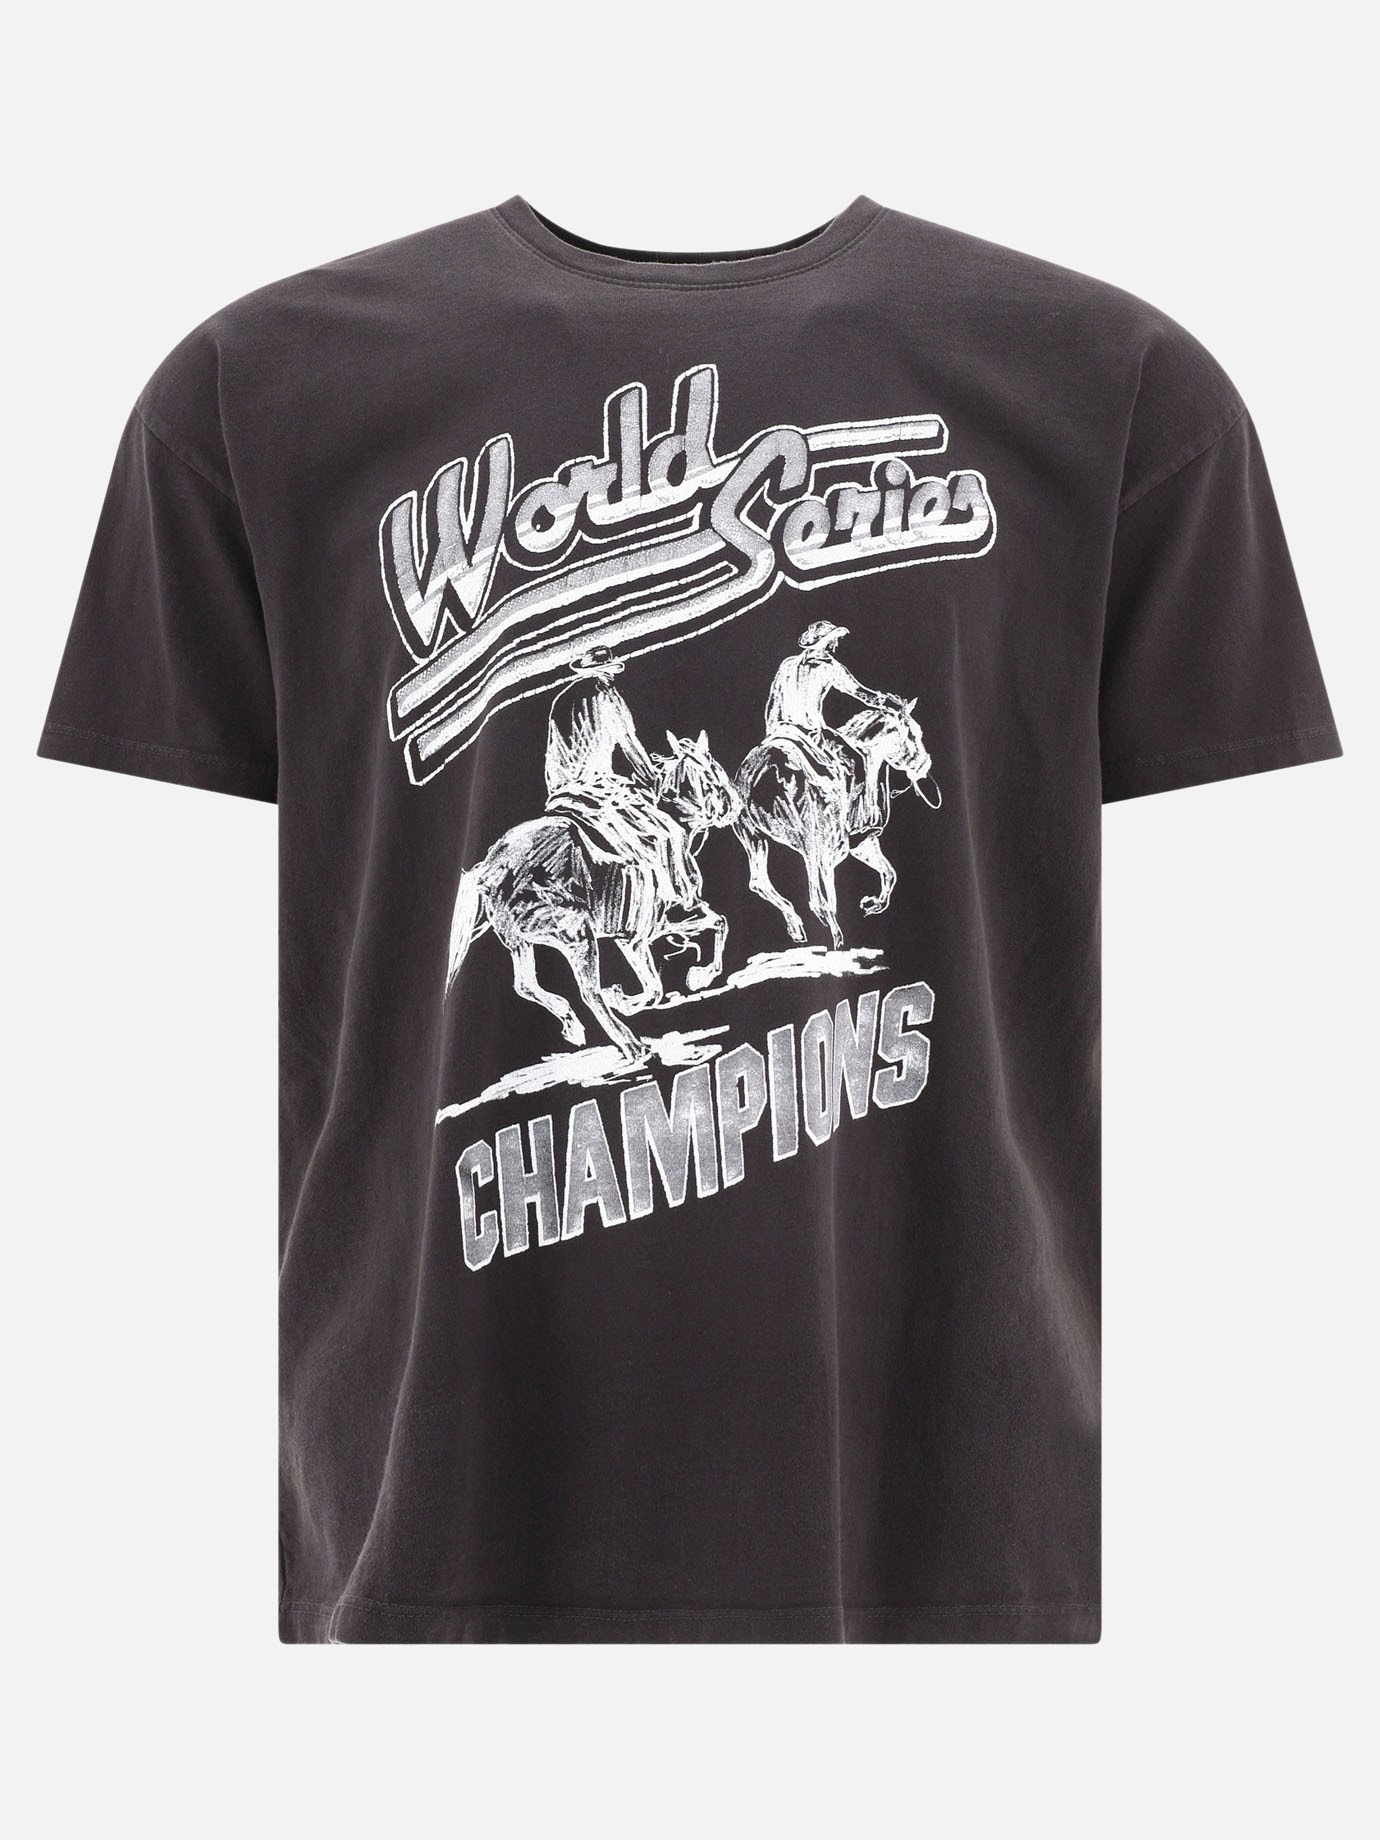  Worls Series Champions  t-shirtby One Of These Days - 3